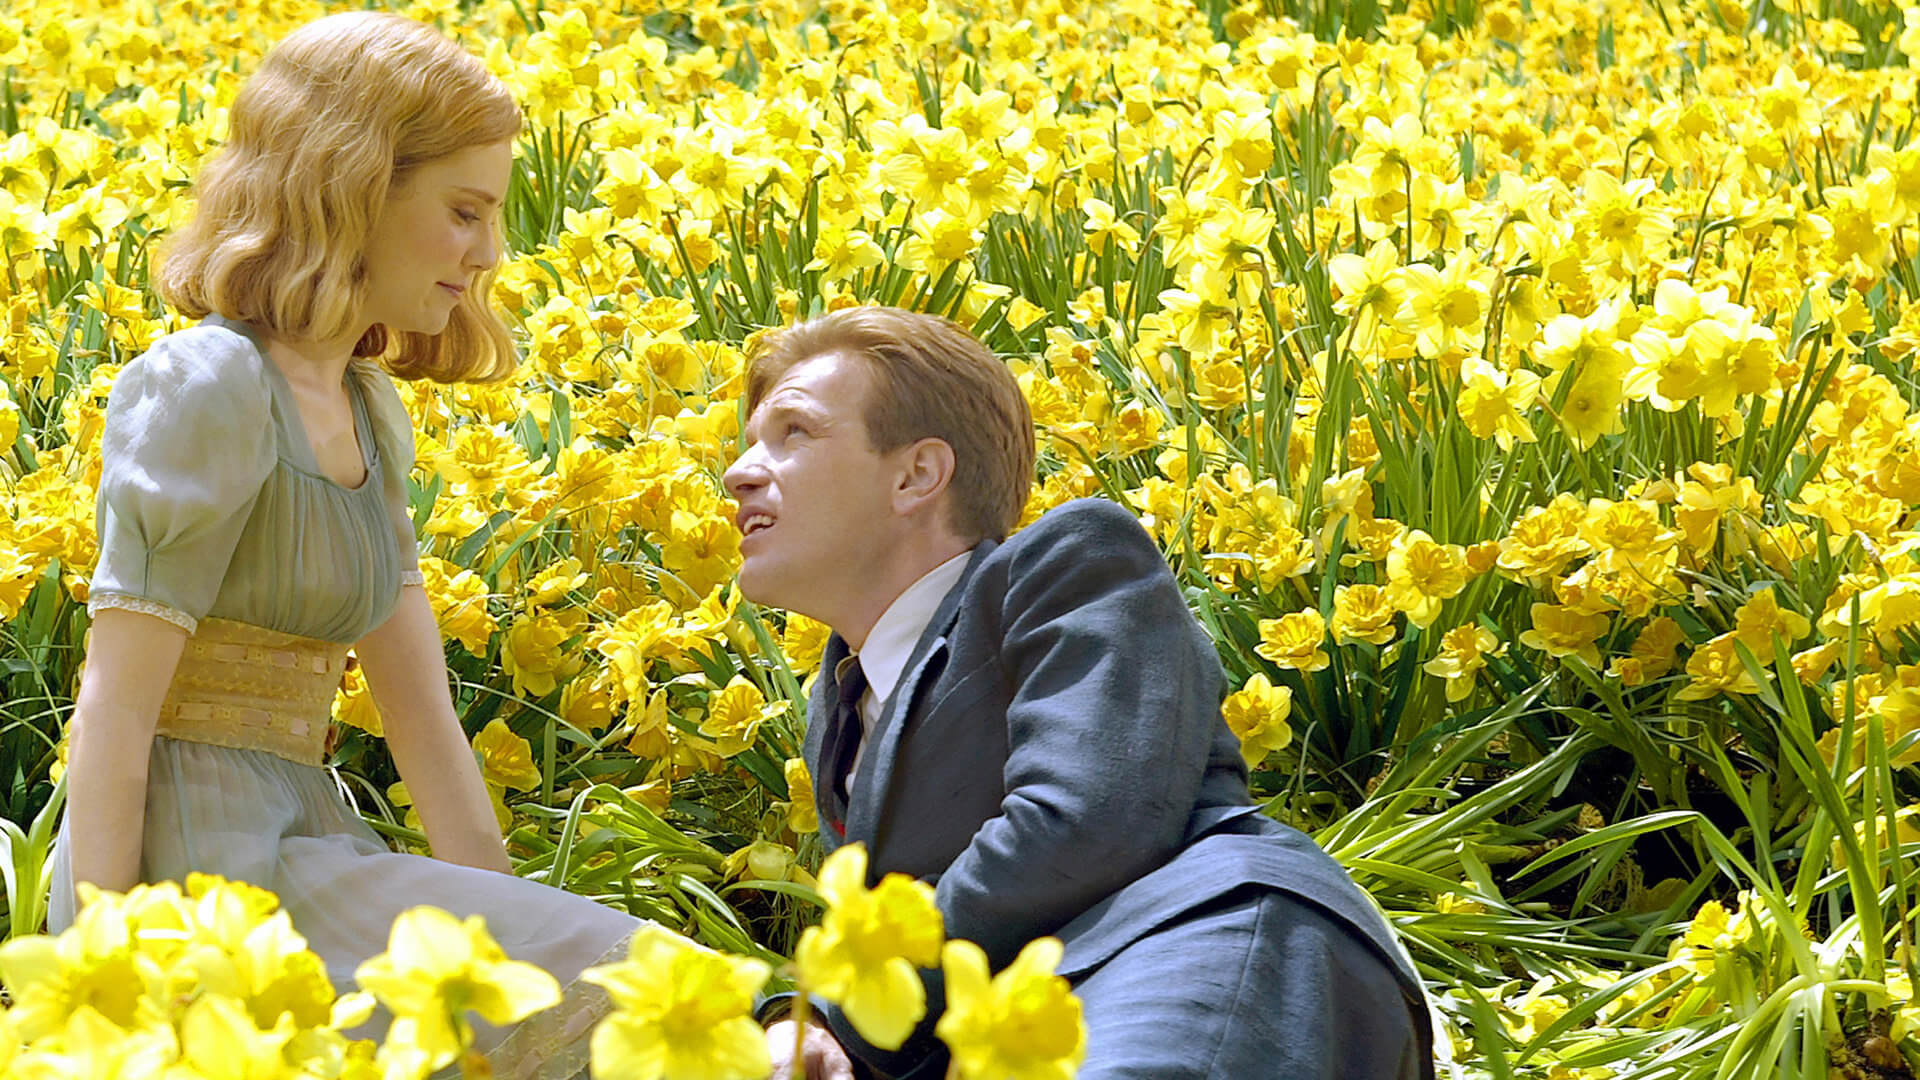 Big Fish (Movie): The film received seven nominations from the British Academy of Film and Television Arts. 1920x1080 Full HD Wallpaper.